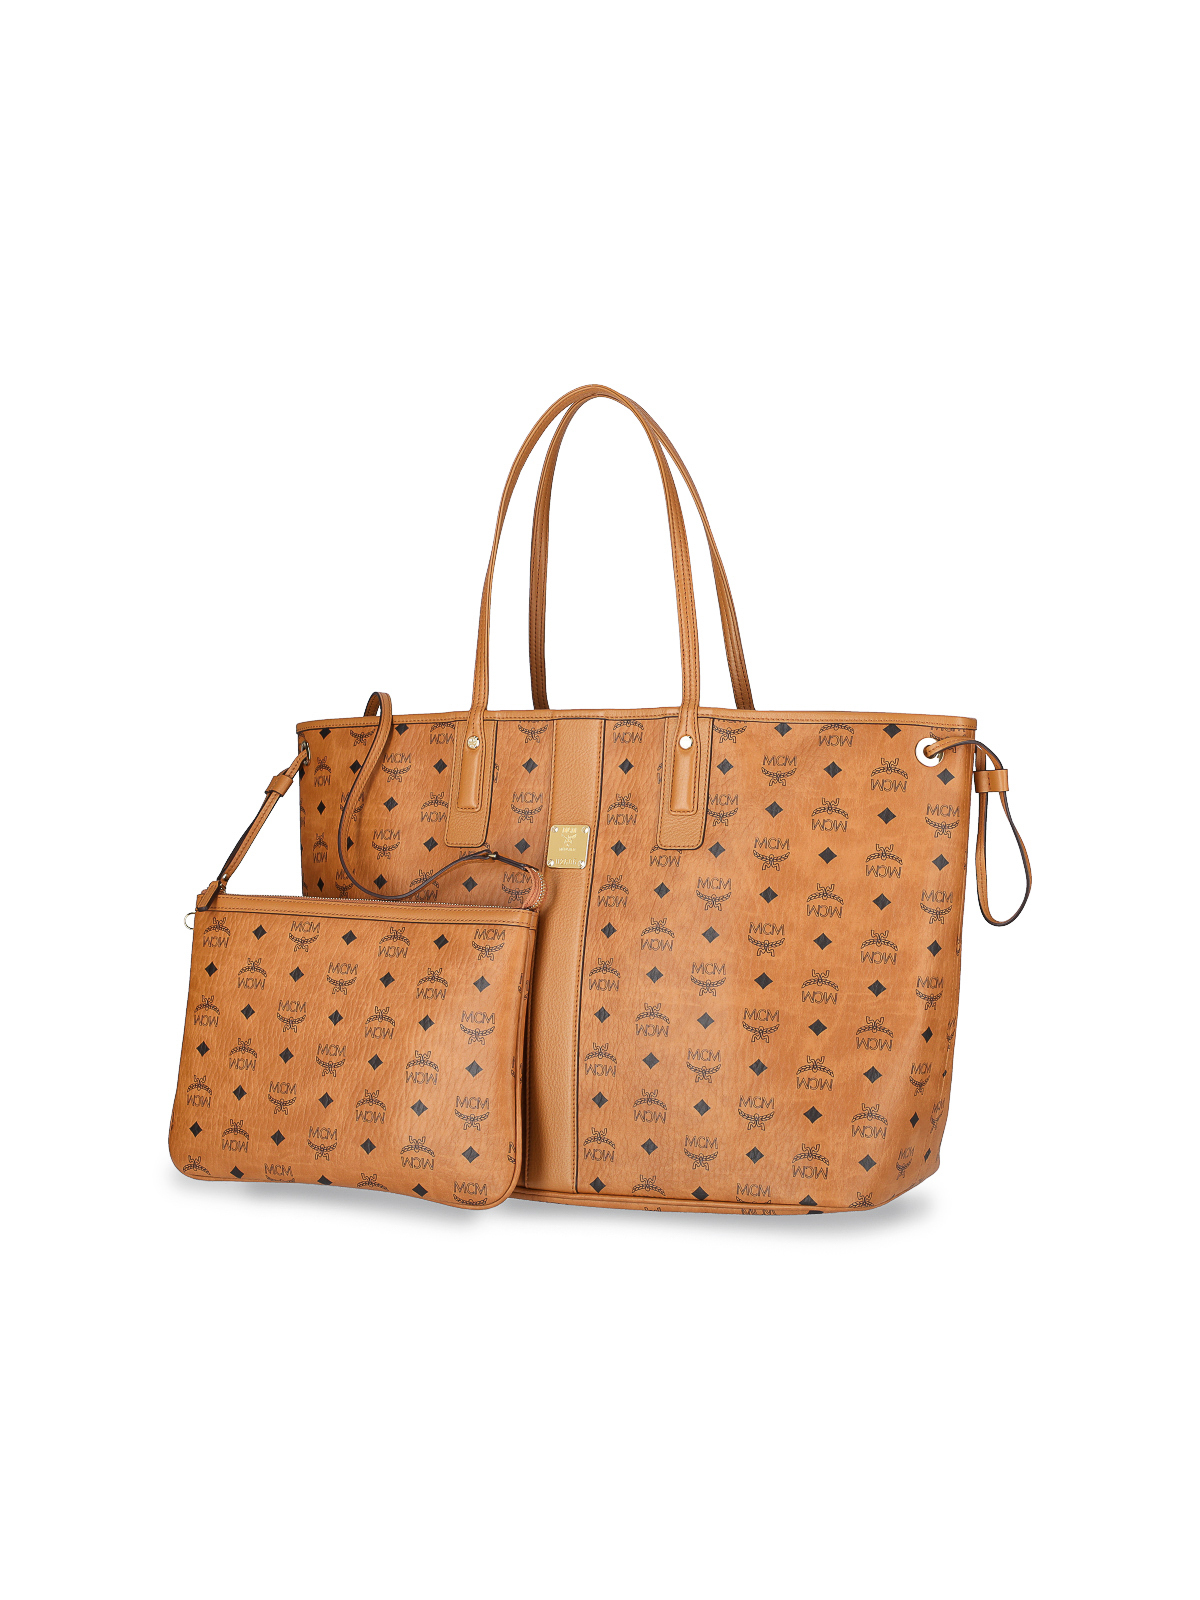 Totes bags Mcm - Mcm bags brown - MWPAAVI01CO | thebs.com [ikrix.com]